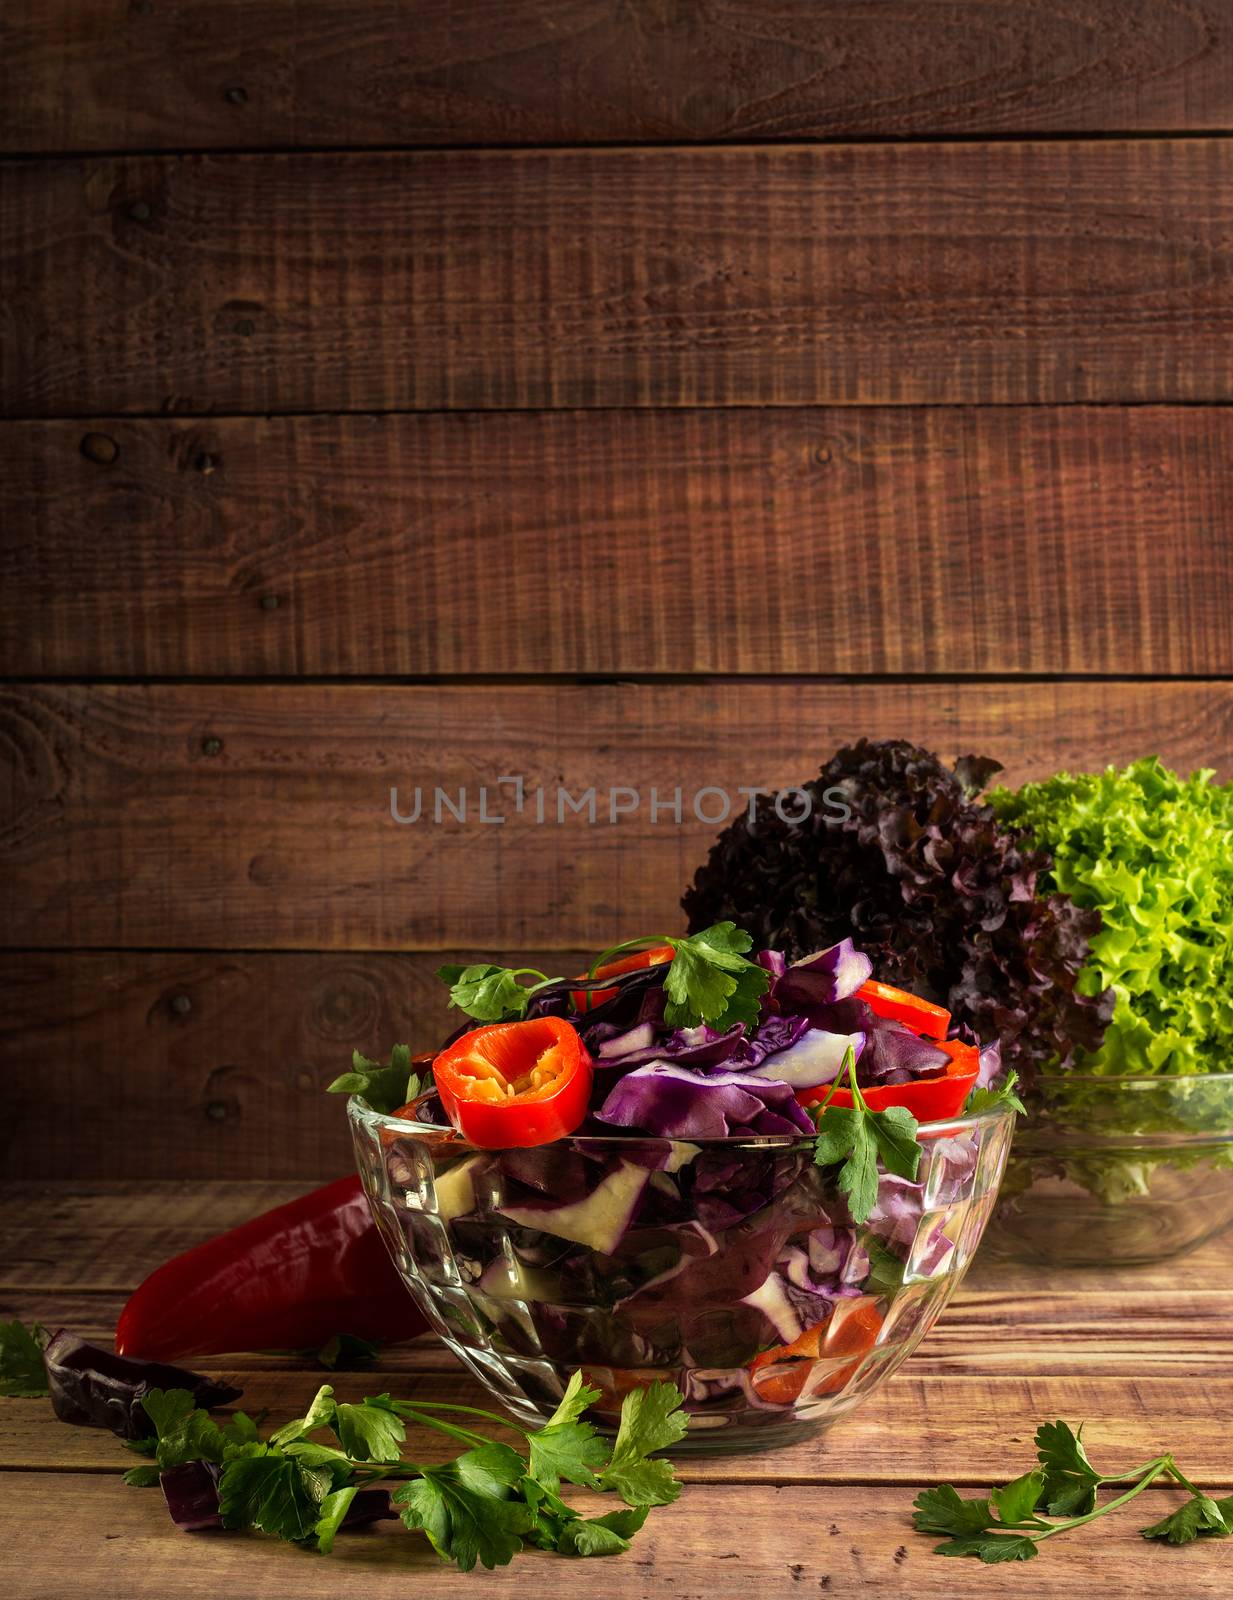 salad with vegetables and greens on wooden table